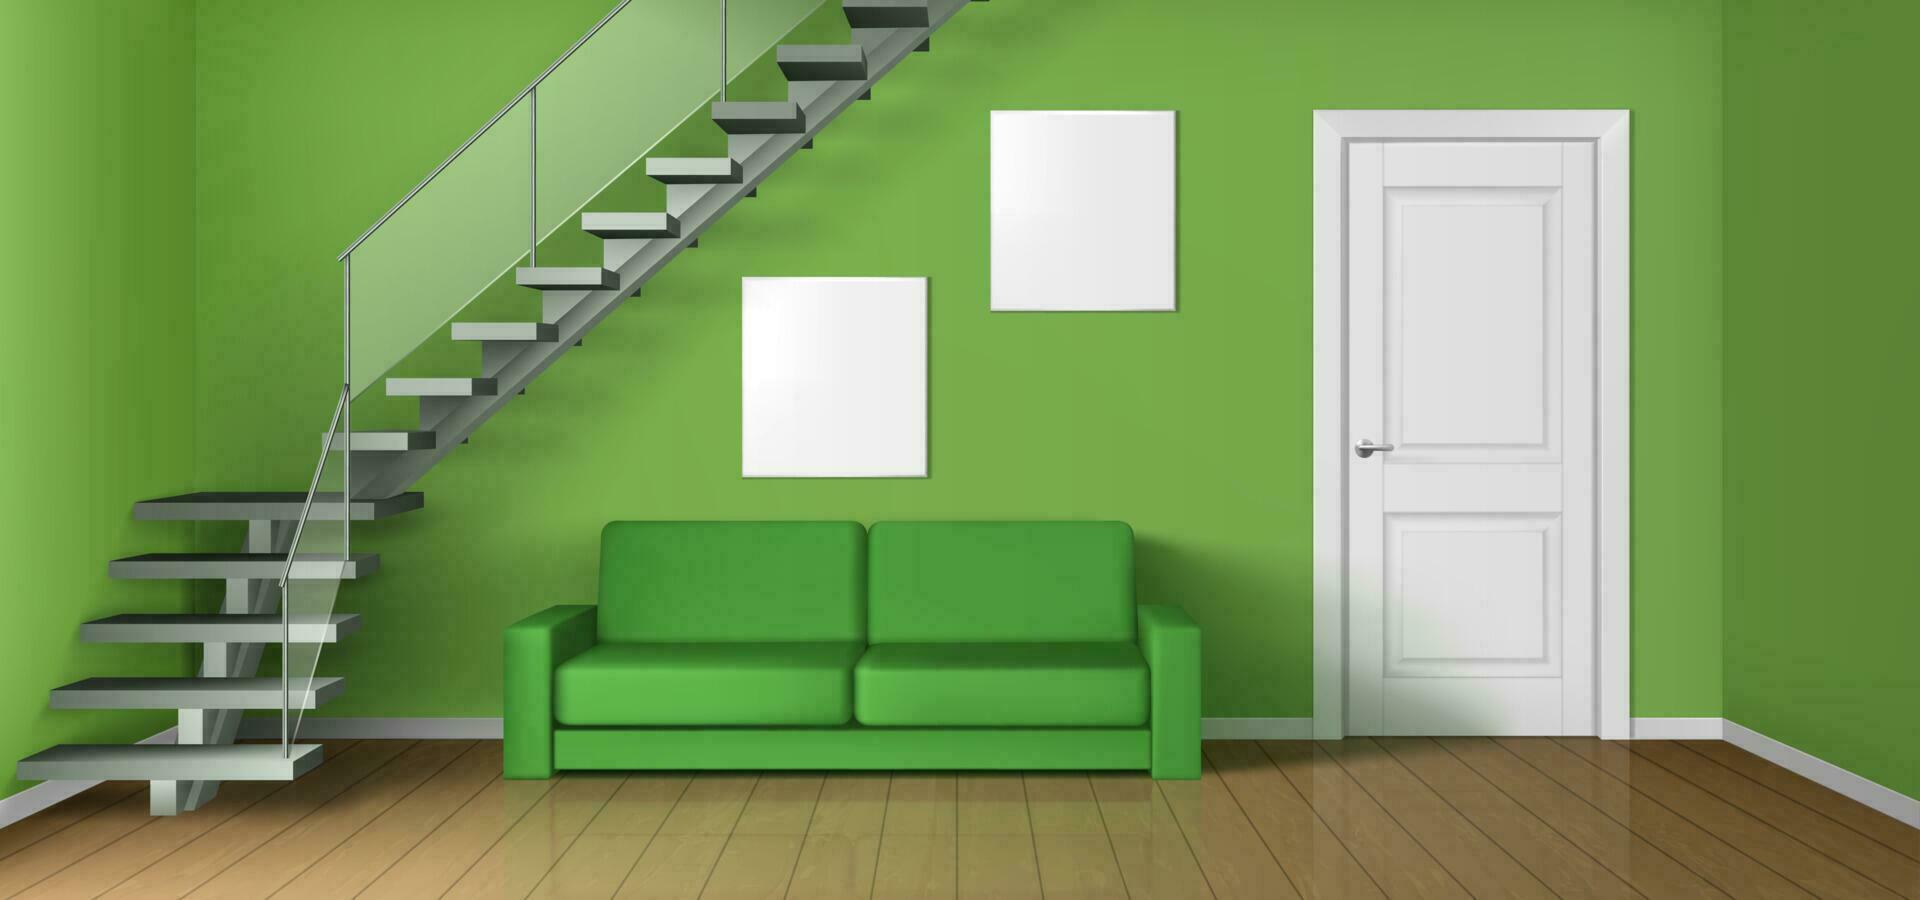 Empty living room with sofa, staircase and door vector